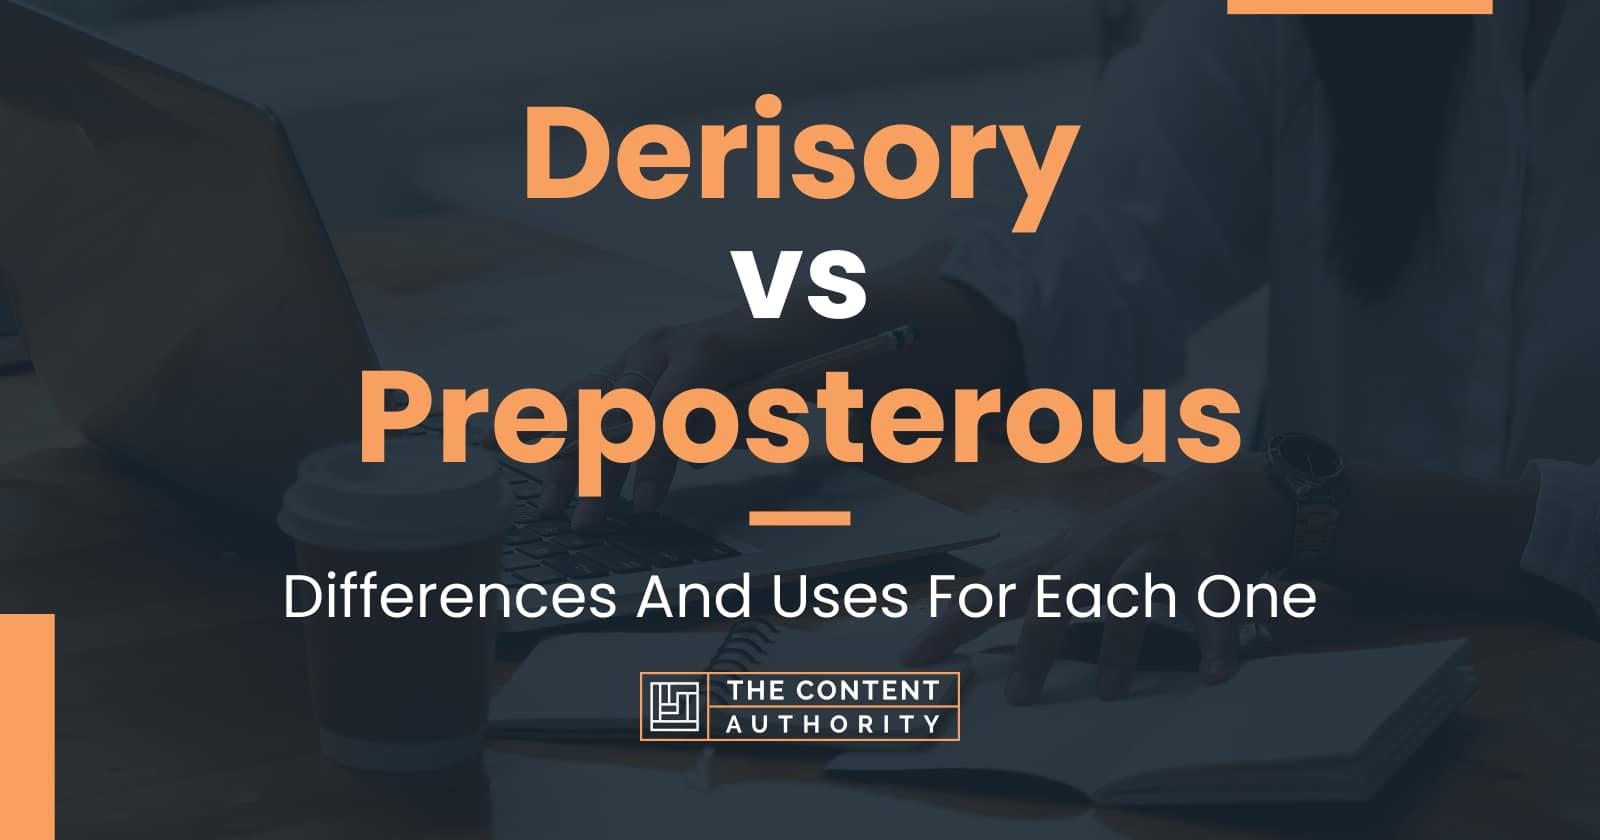 Derisory vs Preposterous: Differences And Uses For Each One